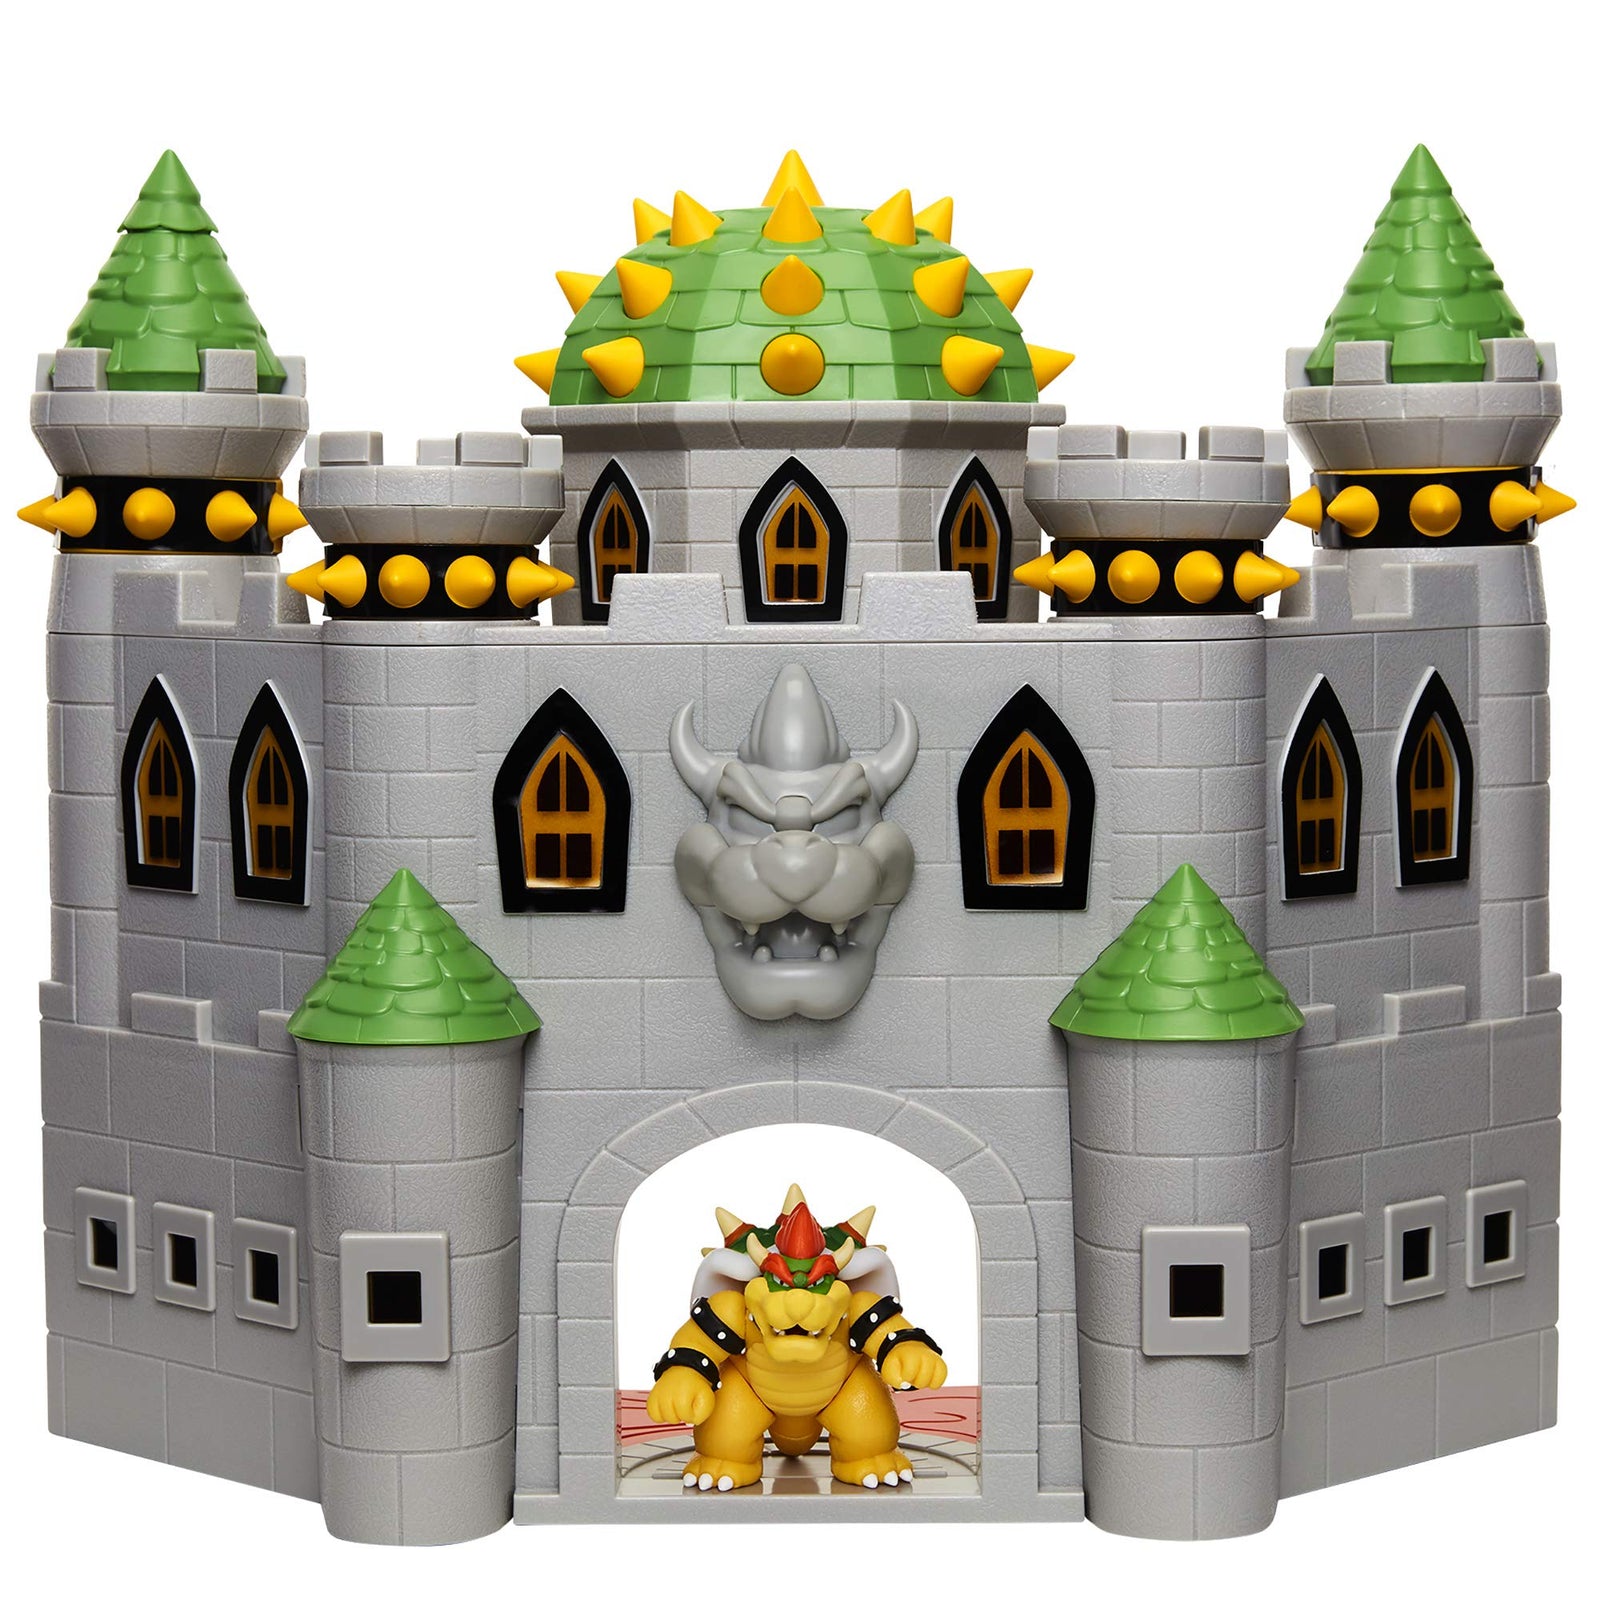 Super Mario 400204 Nintendo Bowser's Castle Super Mario Deluxe Bowser's Castle Playset with 2.5" Exclusive Articulated Bowser Action Figure, Interactive Play Set with Authentic In-Game Sounds